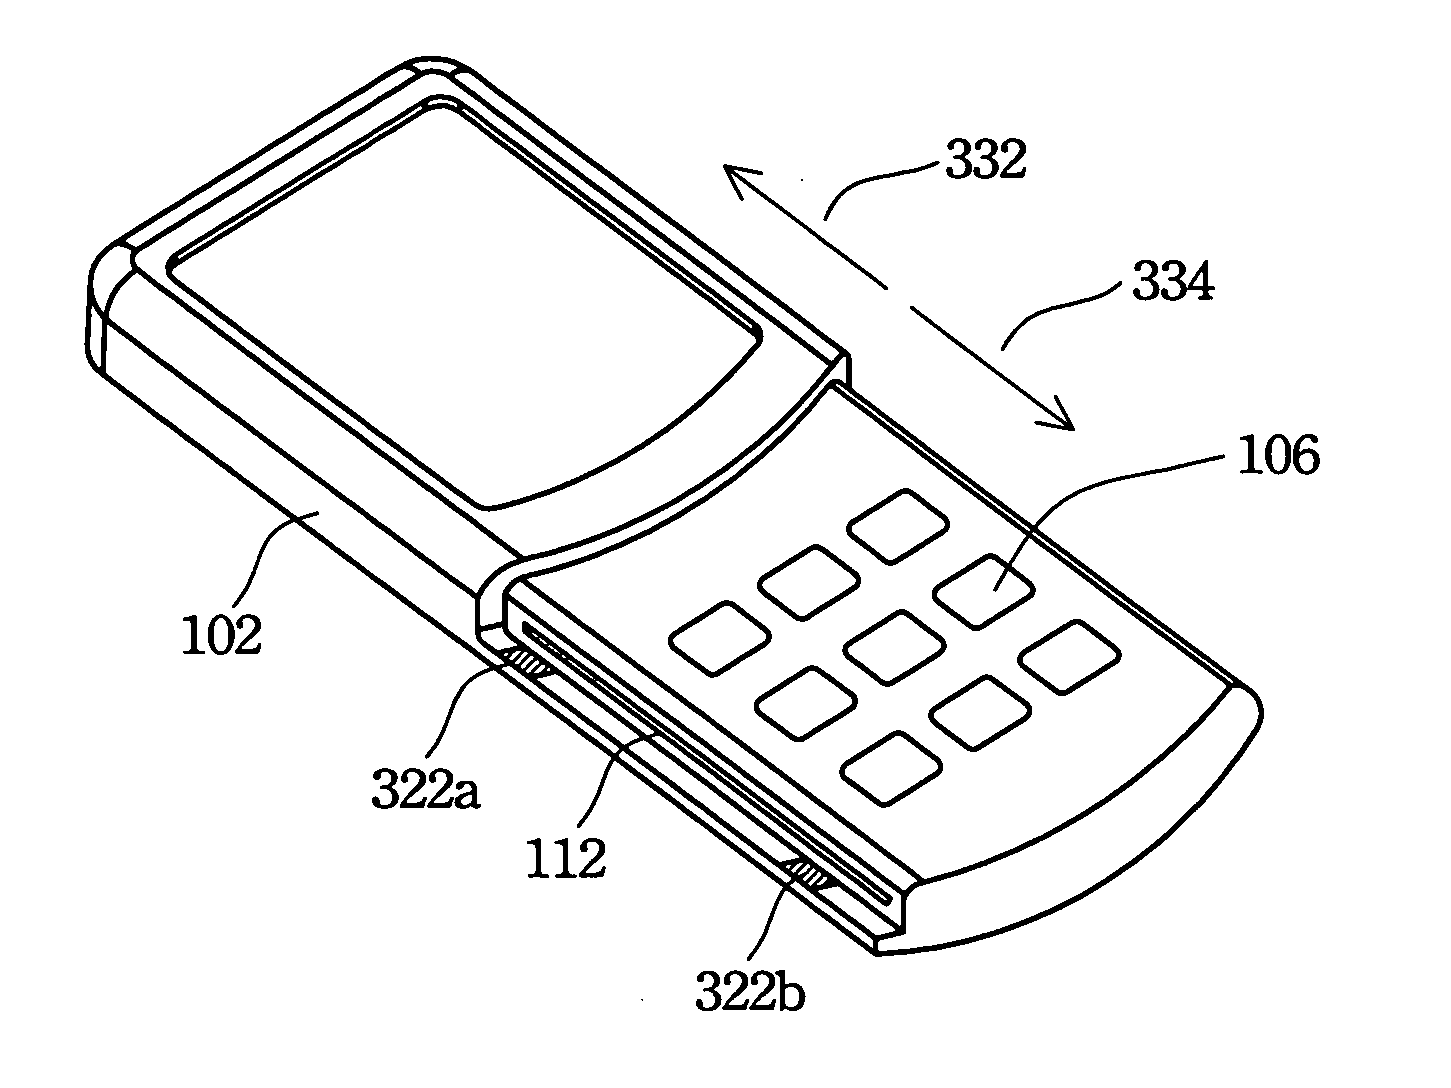 Positioning apparatus and method for a slide cover